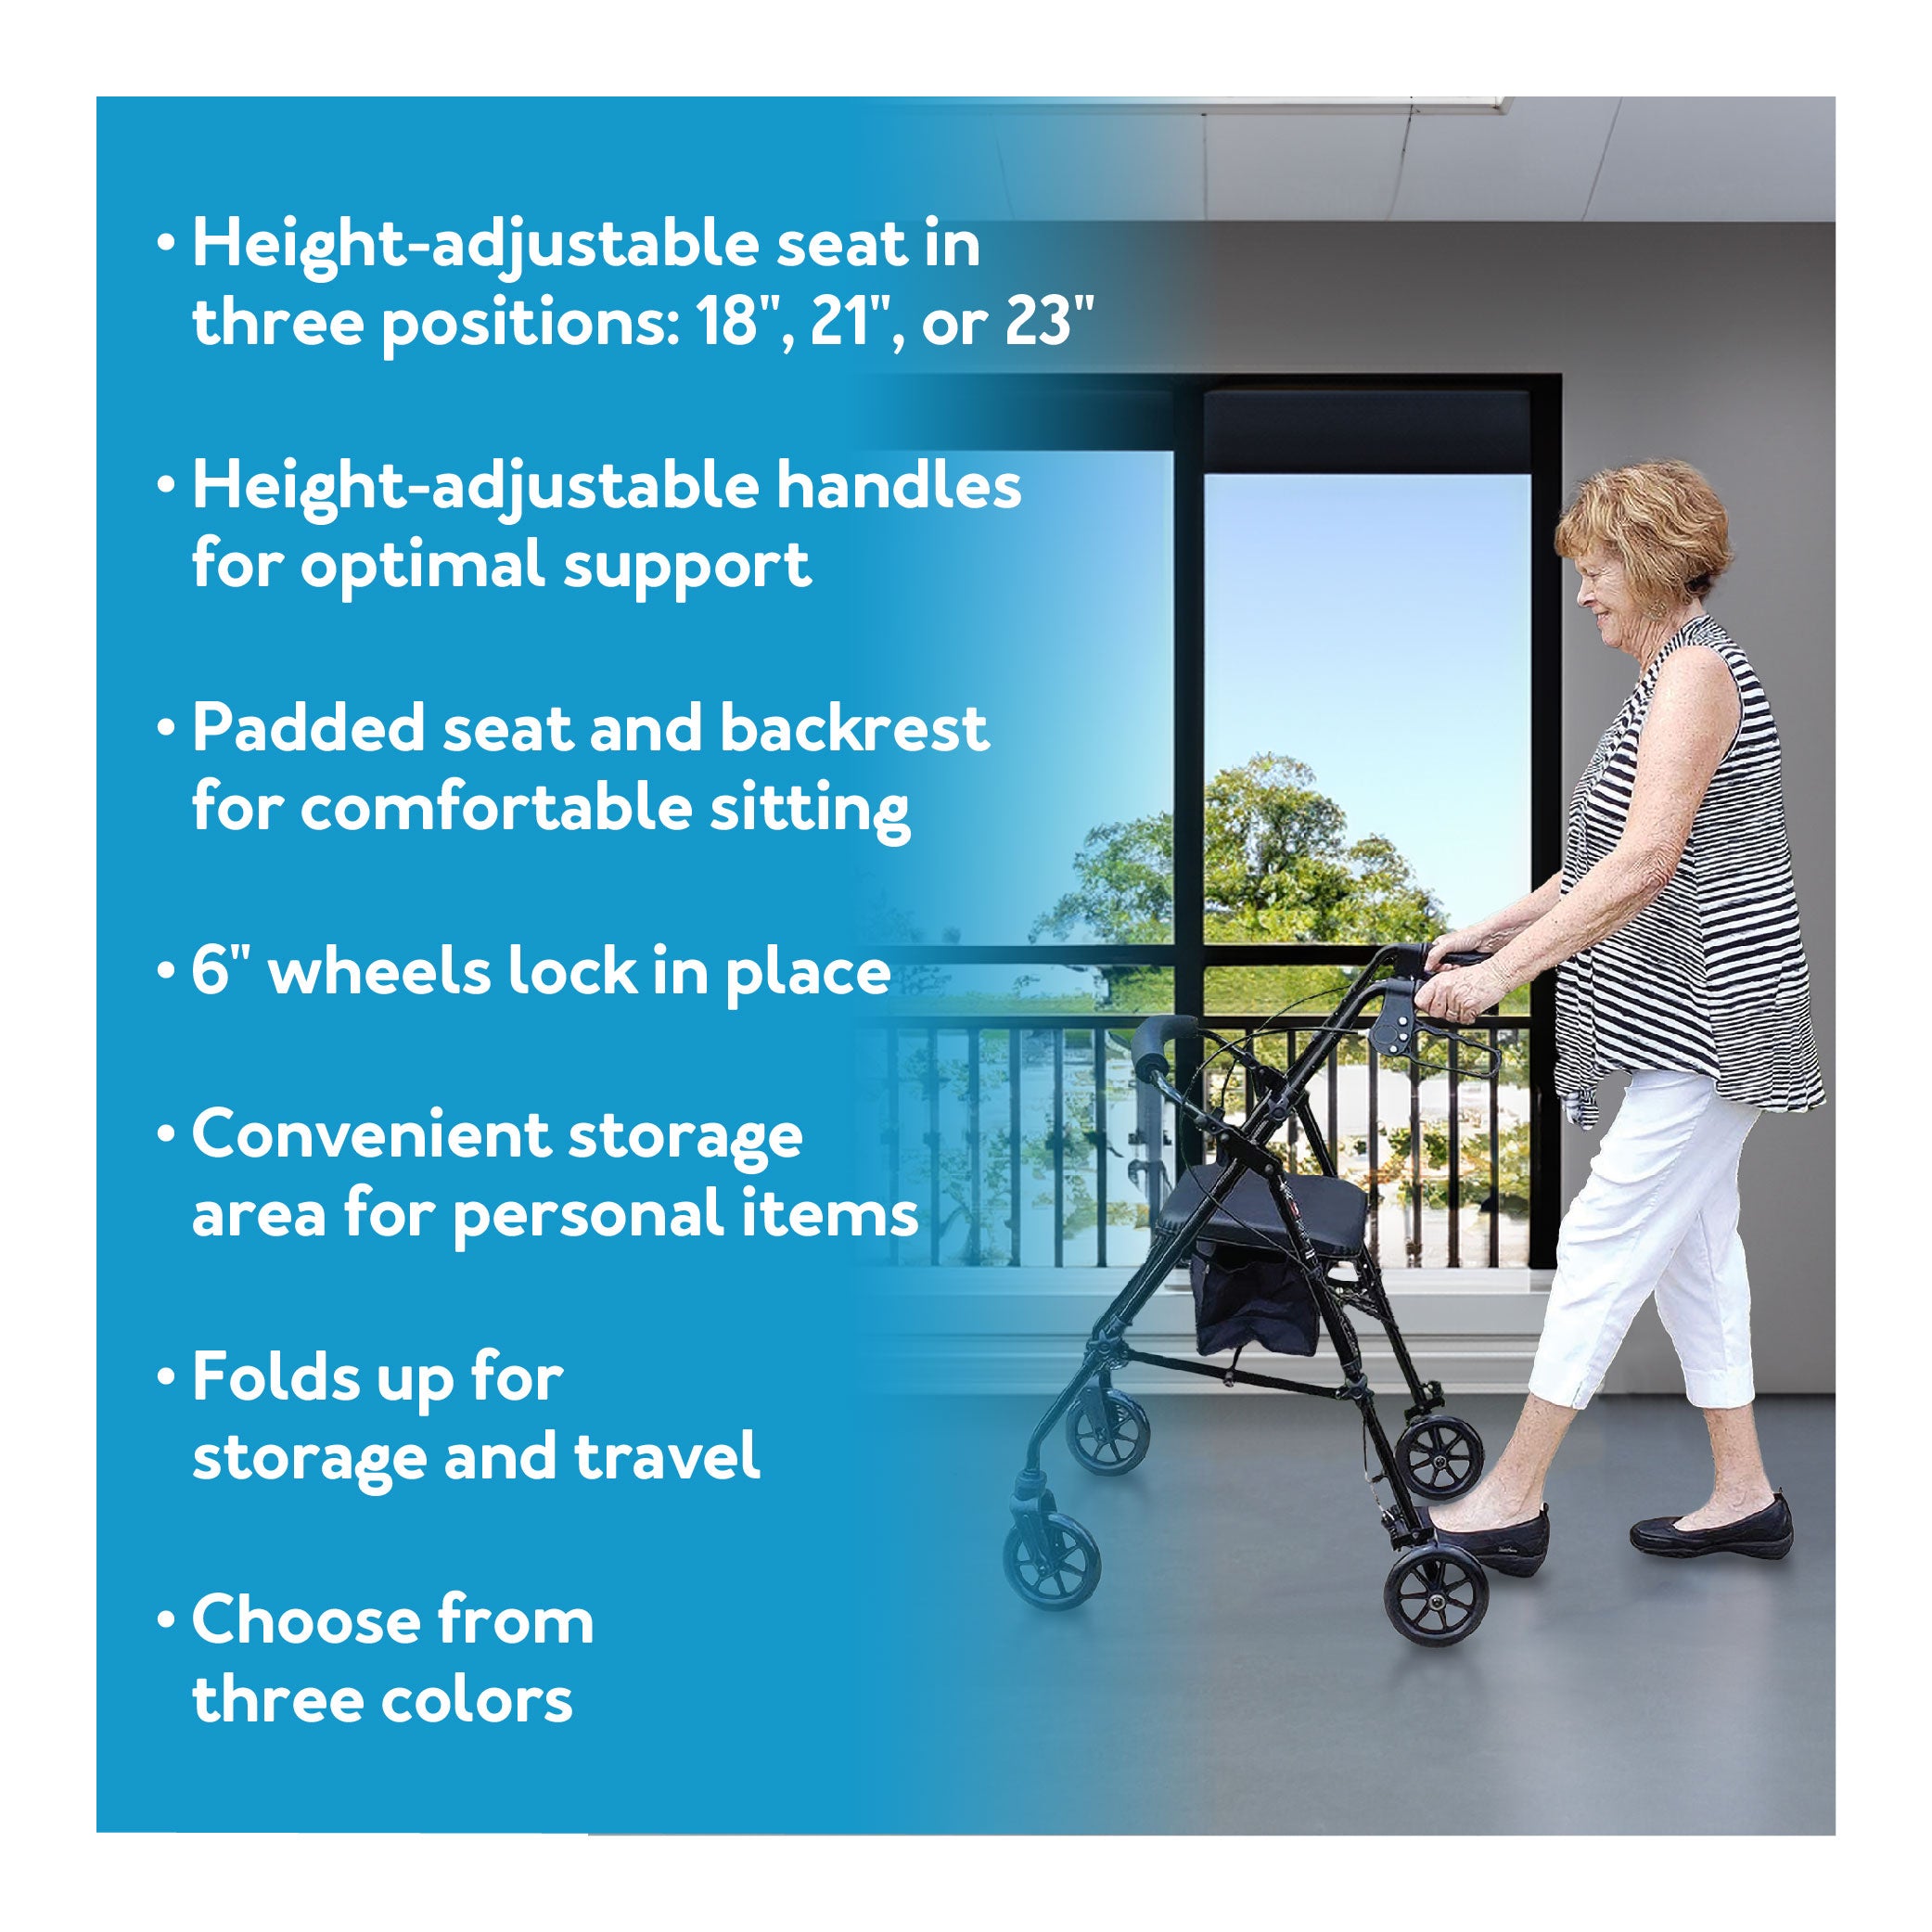 A woman using a rollator inside with text showing product features as described in the listing.